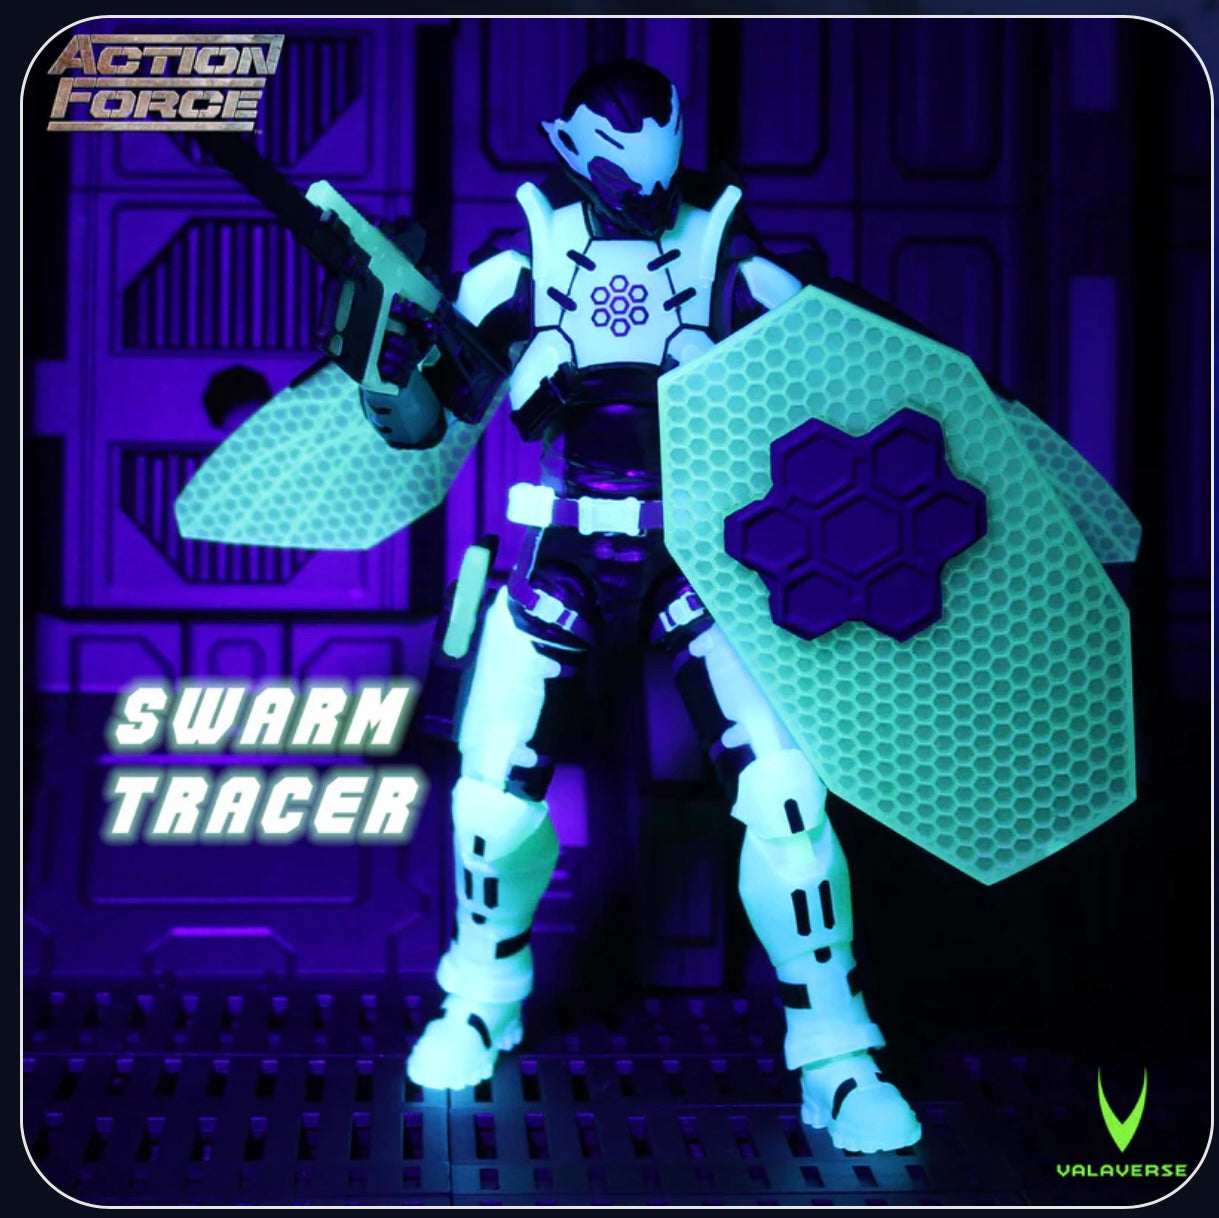 Valaverse Action Force Series 4: Swarm Tracer Deluxe